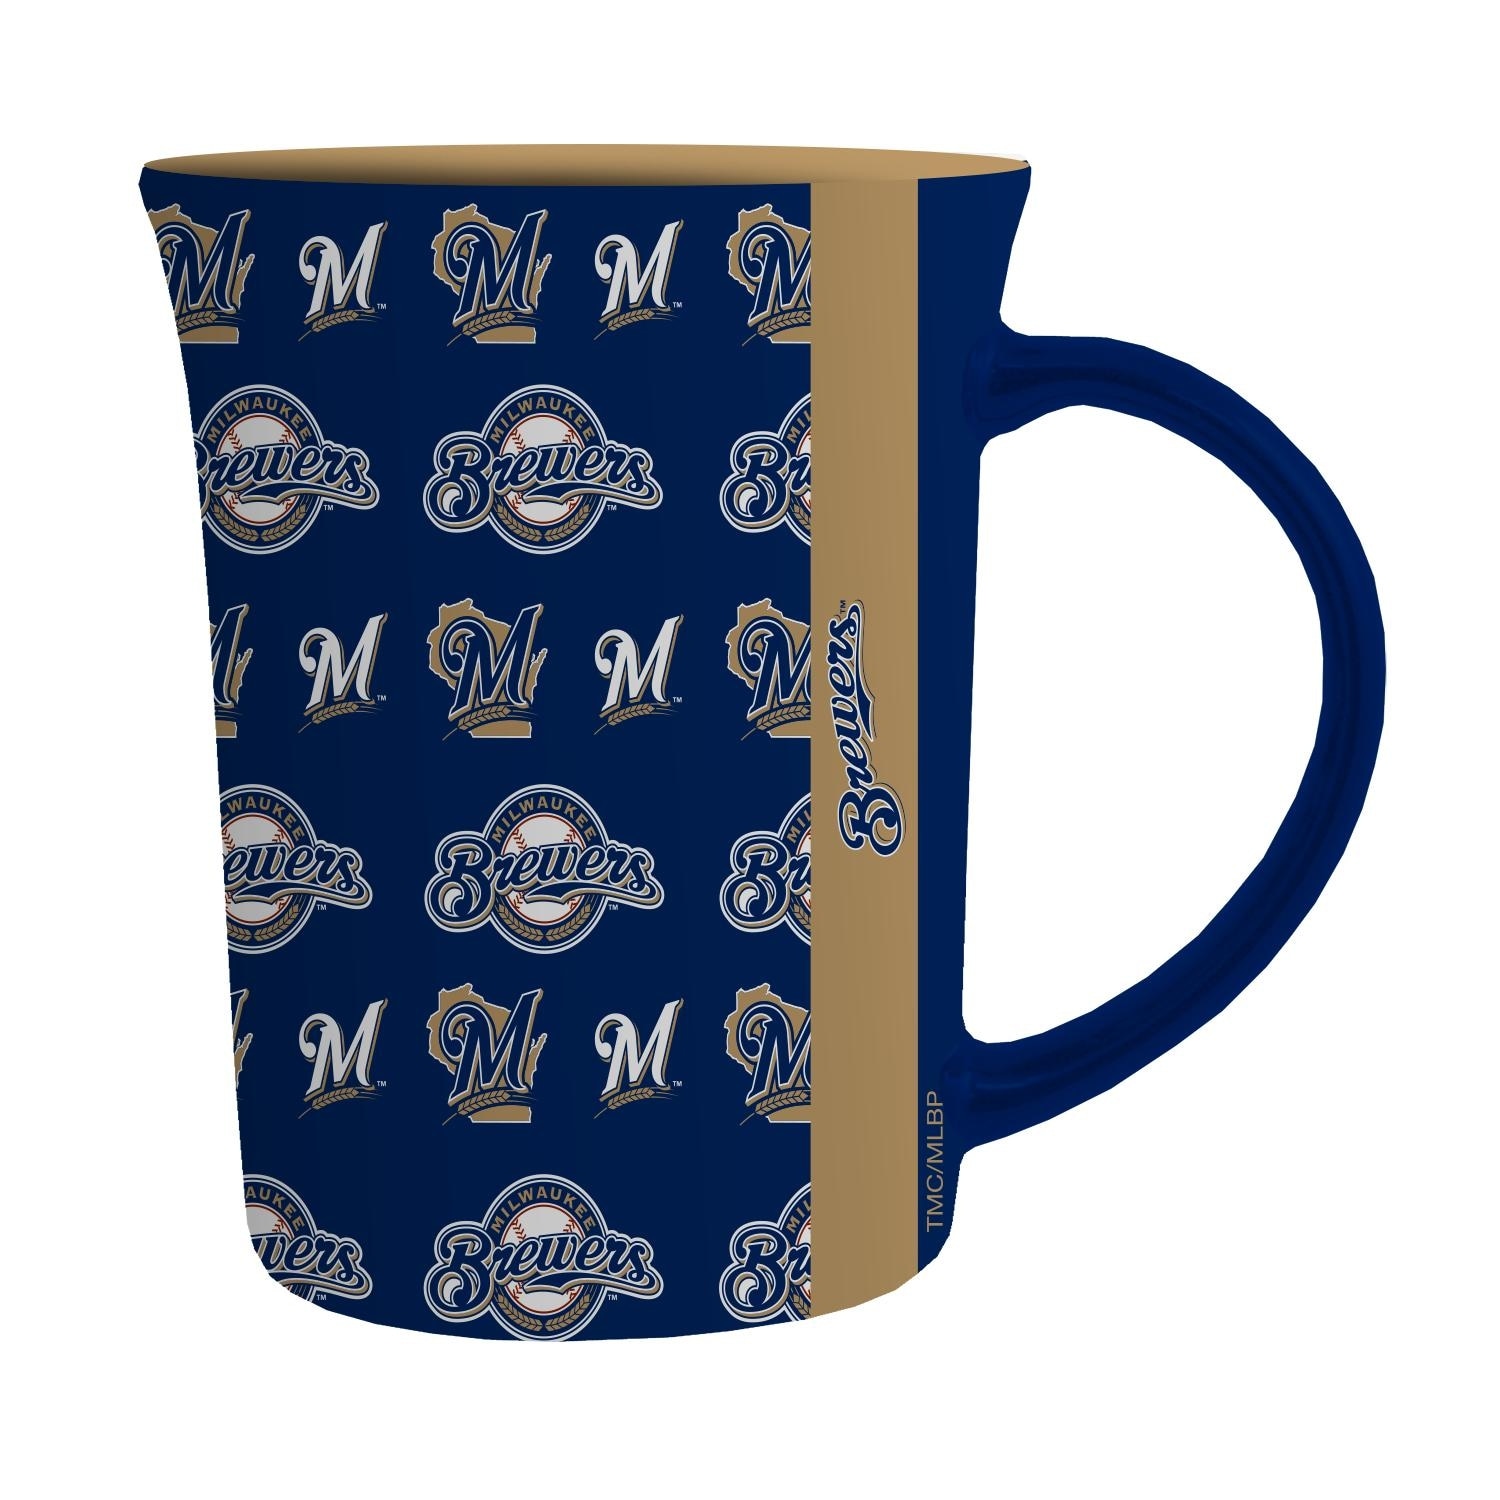 https://ak1.ostkcdn.com/images/products/is/images/direct/c73ce10917a8ced986909bb9abdf7b24a60ad473/Milwaukee-Brewers-Line-Up-Mug.jpg